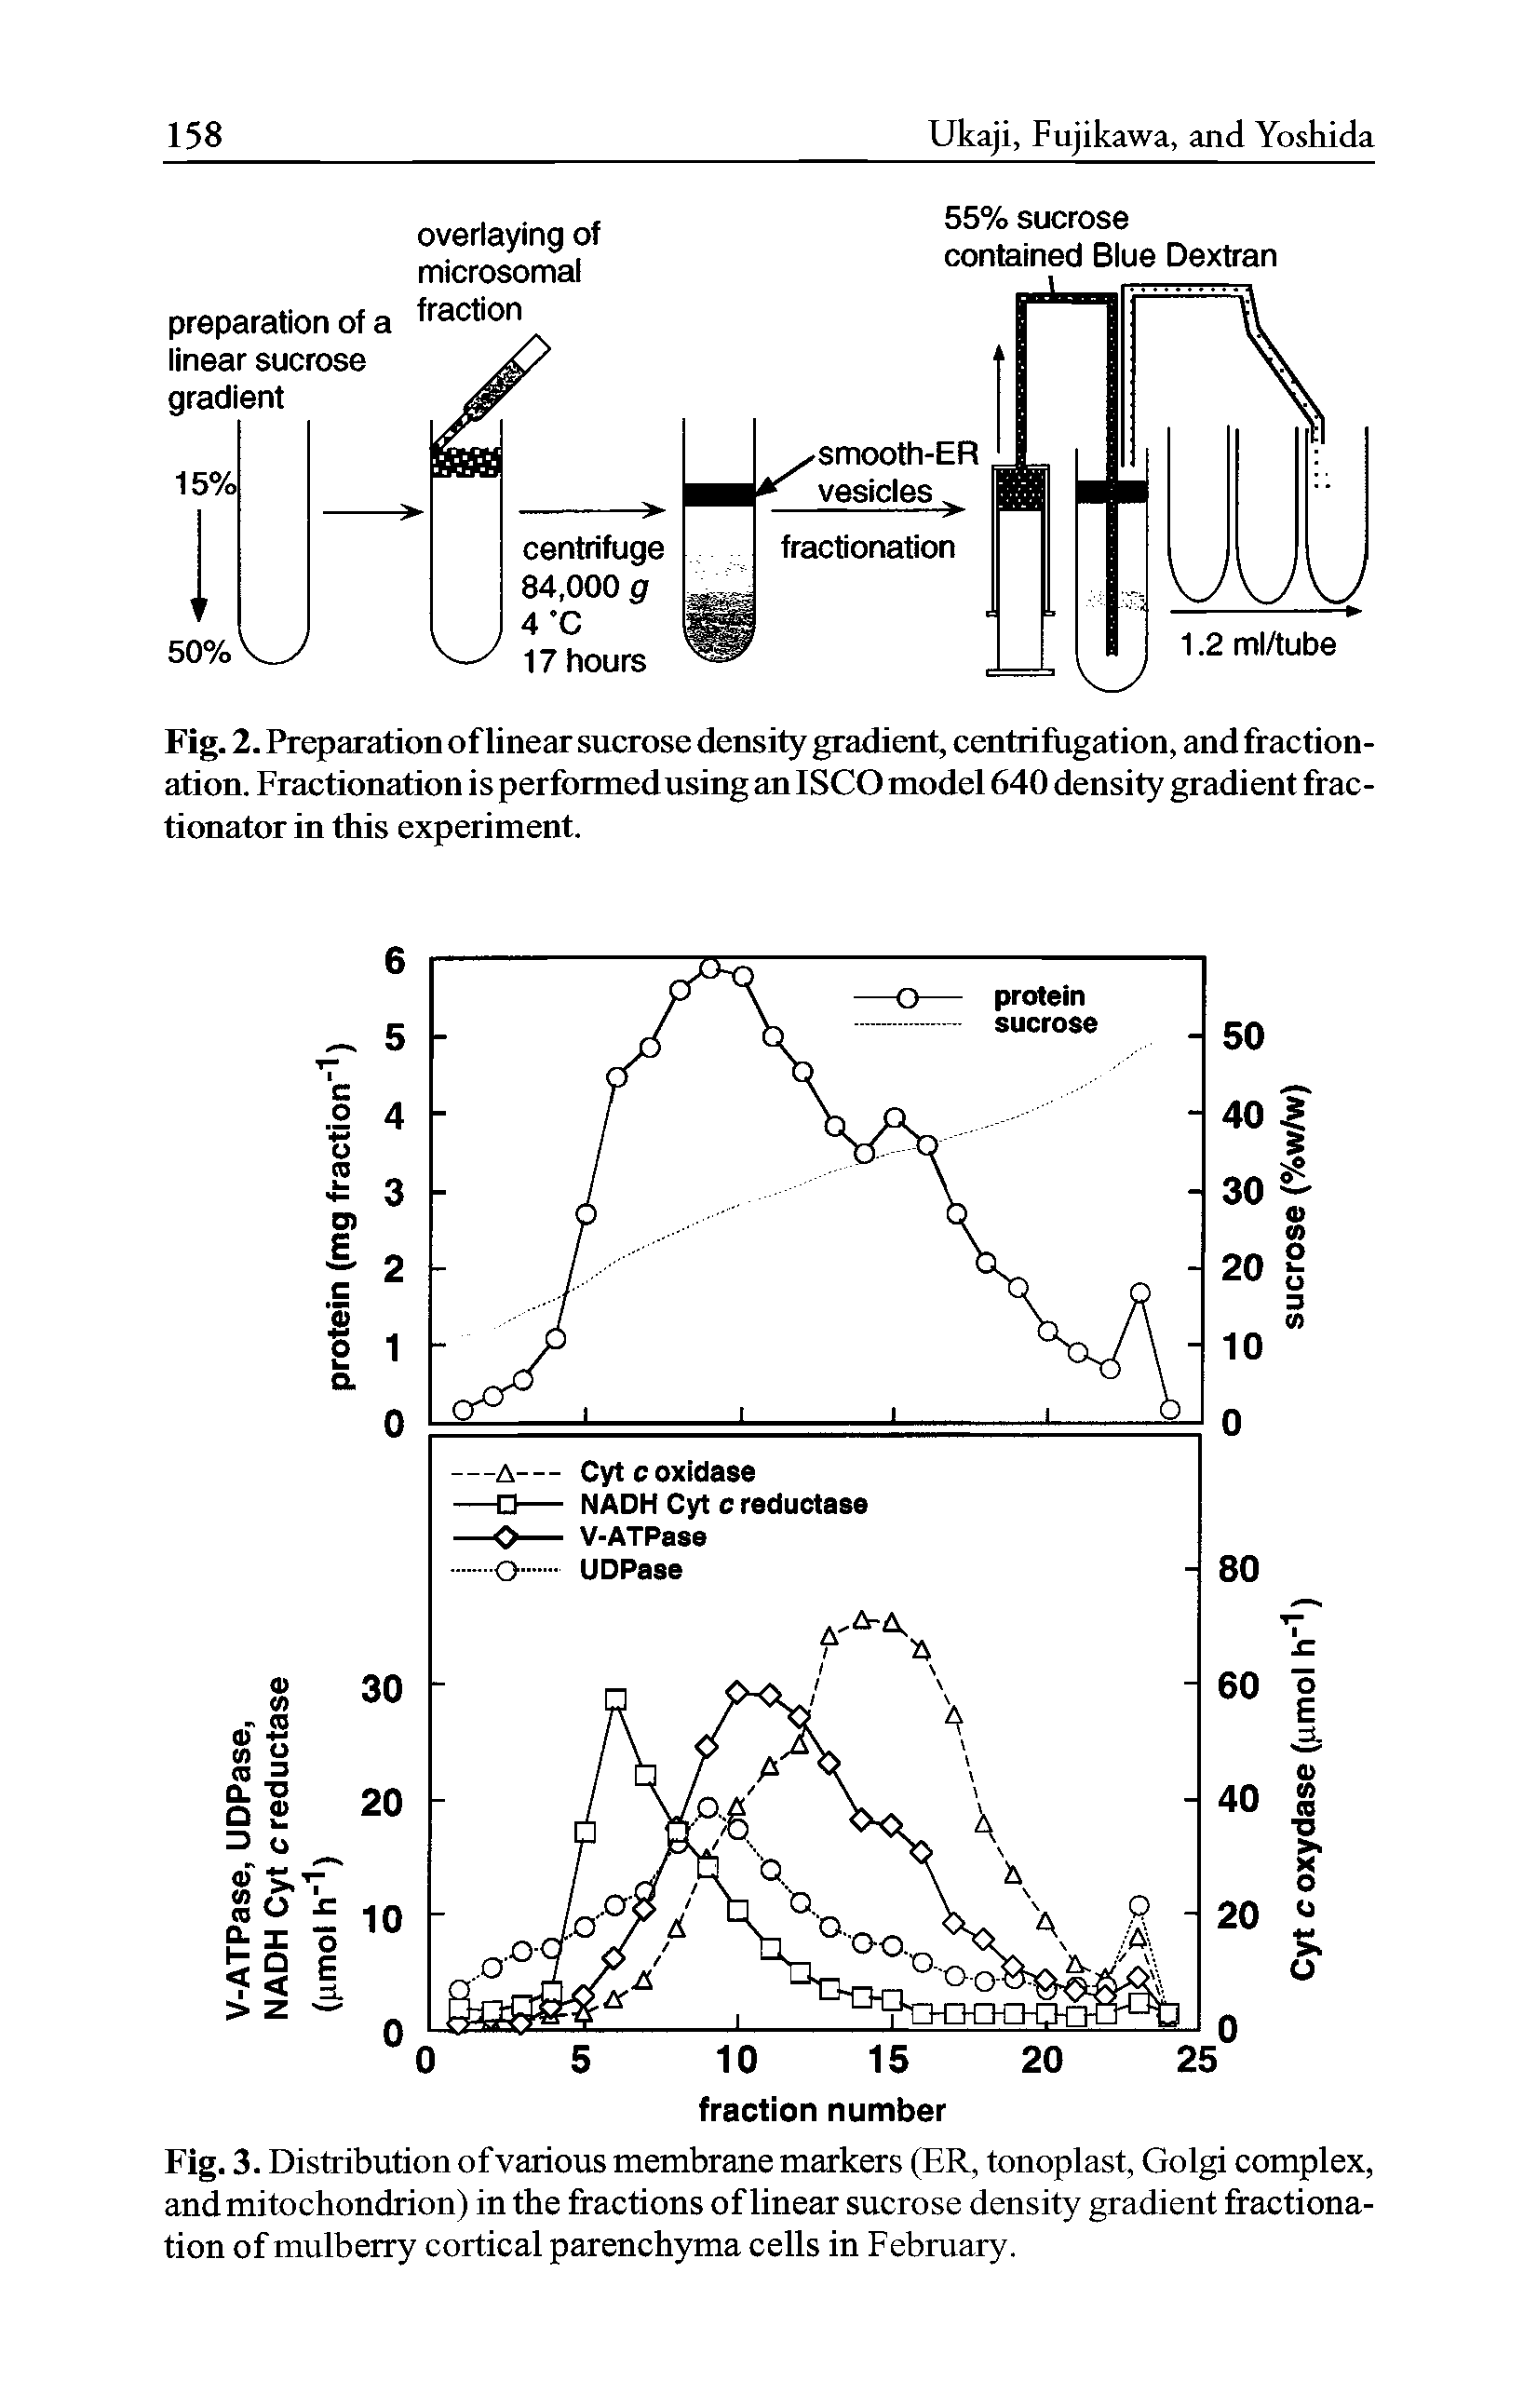 Fig. 3. Distribution ofvarious membrane markers (ER, tonoplast, Golgi complex, and mitochondrion) in the fractions of linear sucrose density gradient fractionation of mulberry cortical parenchyma cells in February.